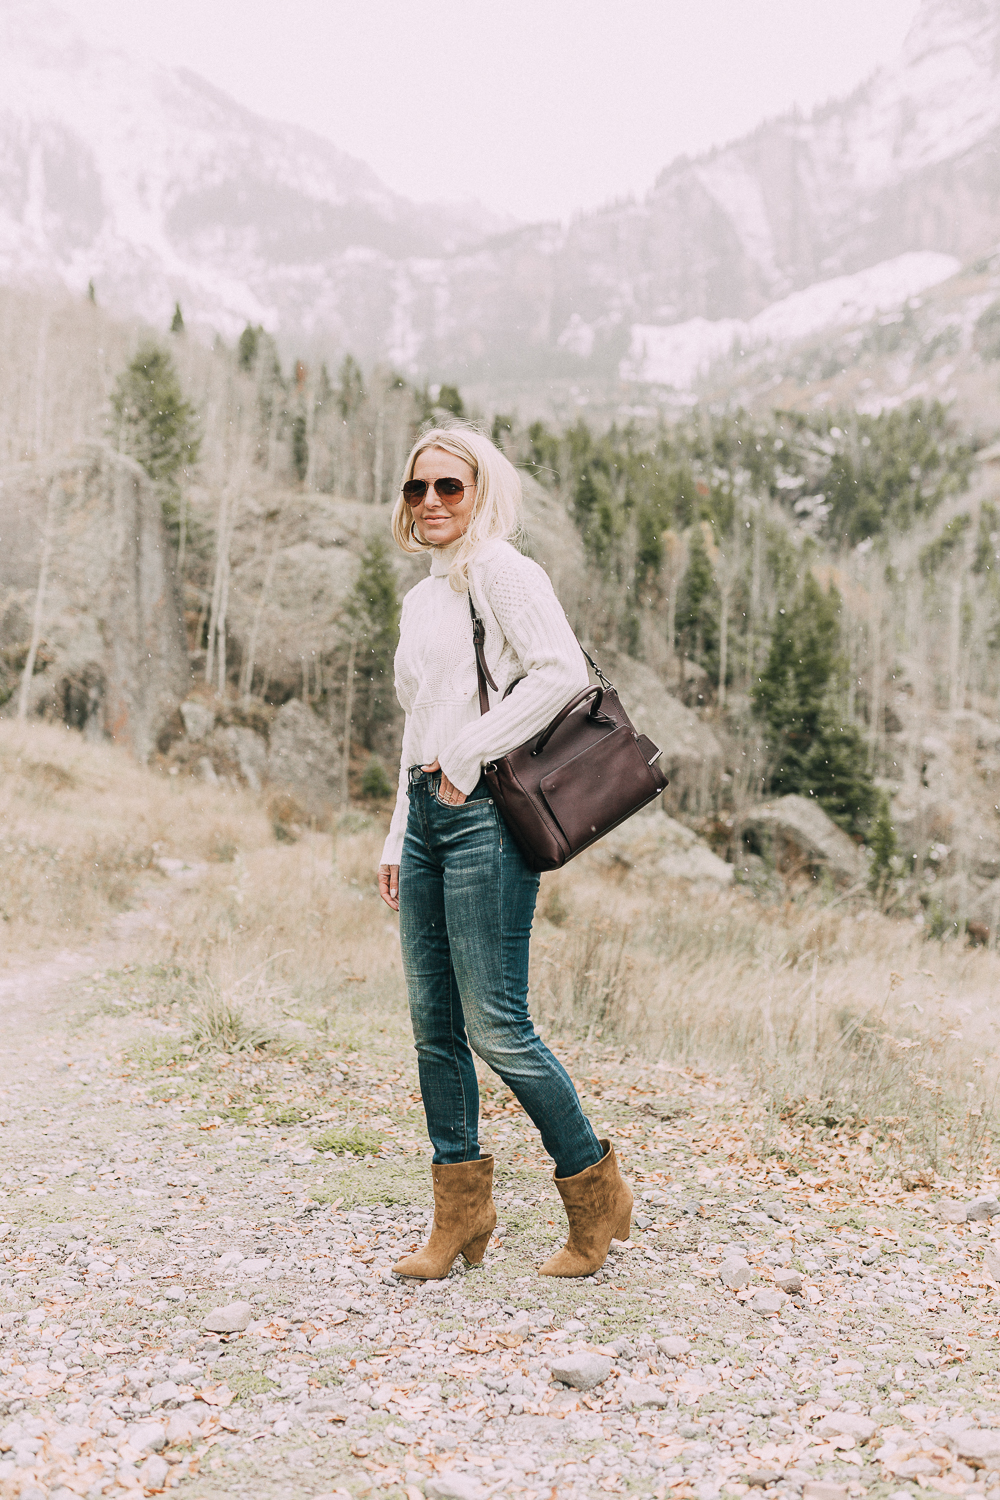 Suede Booties by Vince Camuto paired with white turtleneck cable knit sweater, burgundy tote bag, and white wool coat on blonde woman in the mountains